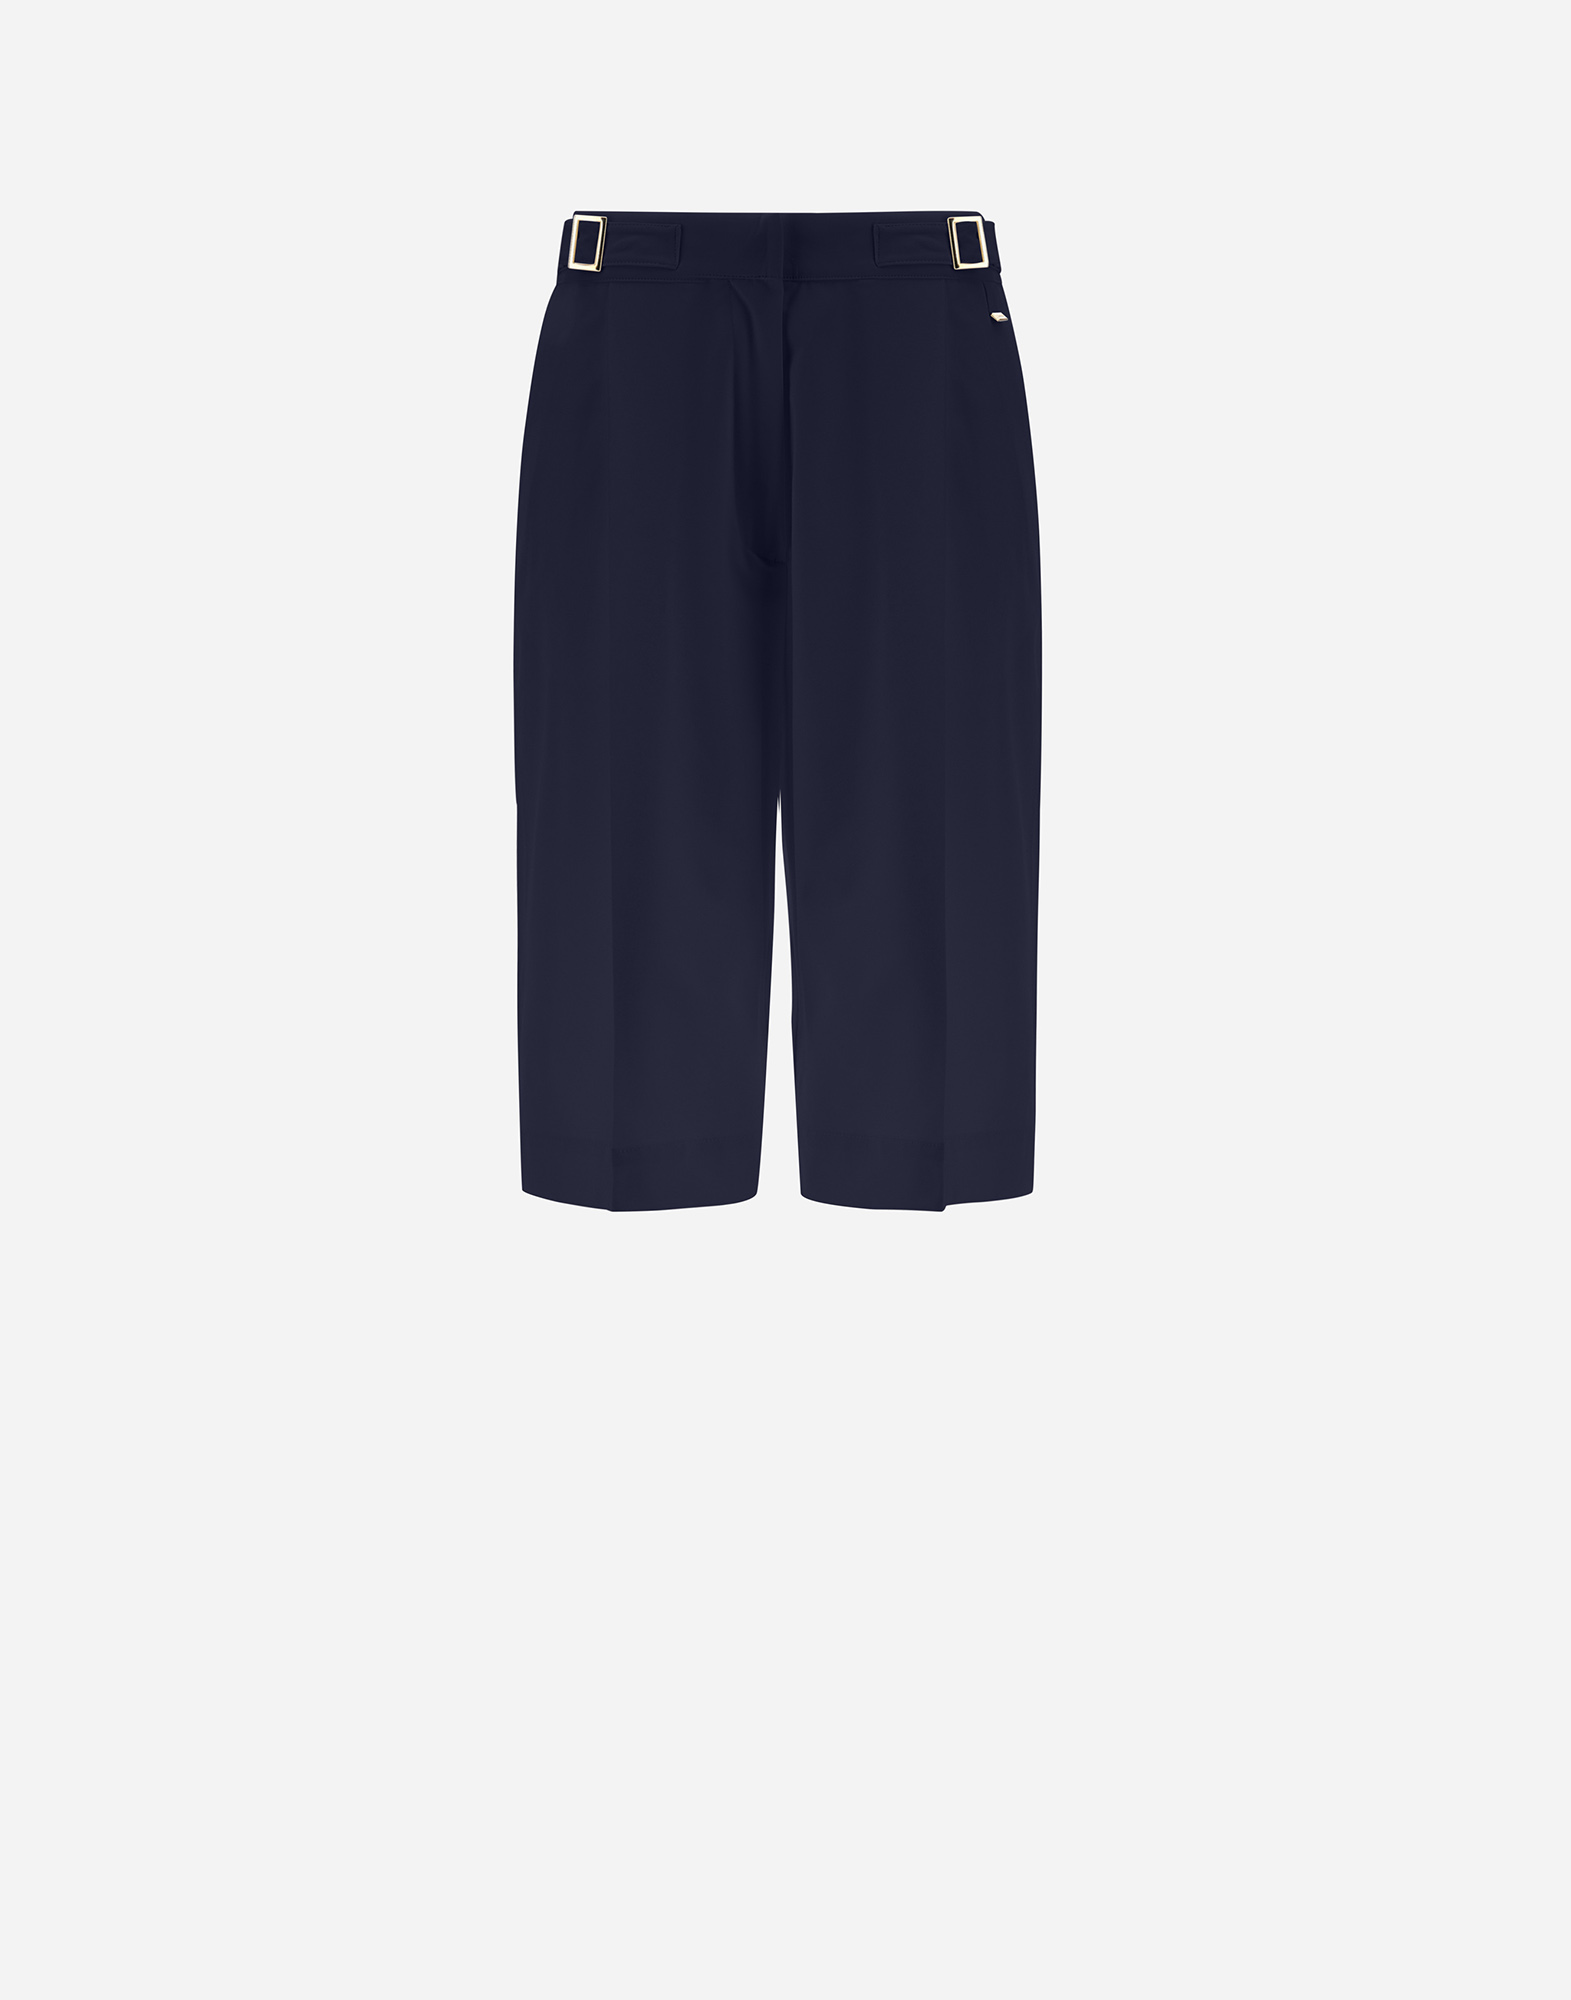 Herno Structures Nylon Shorts In Navy Blue